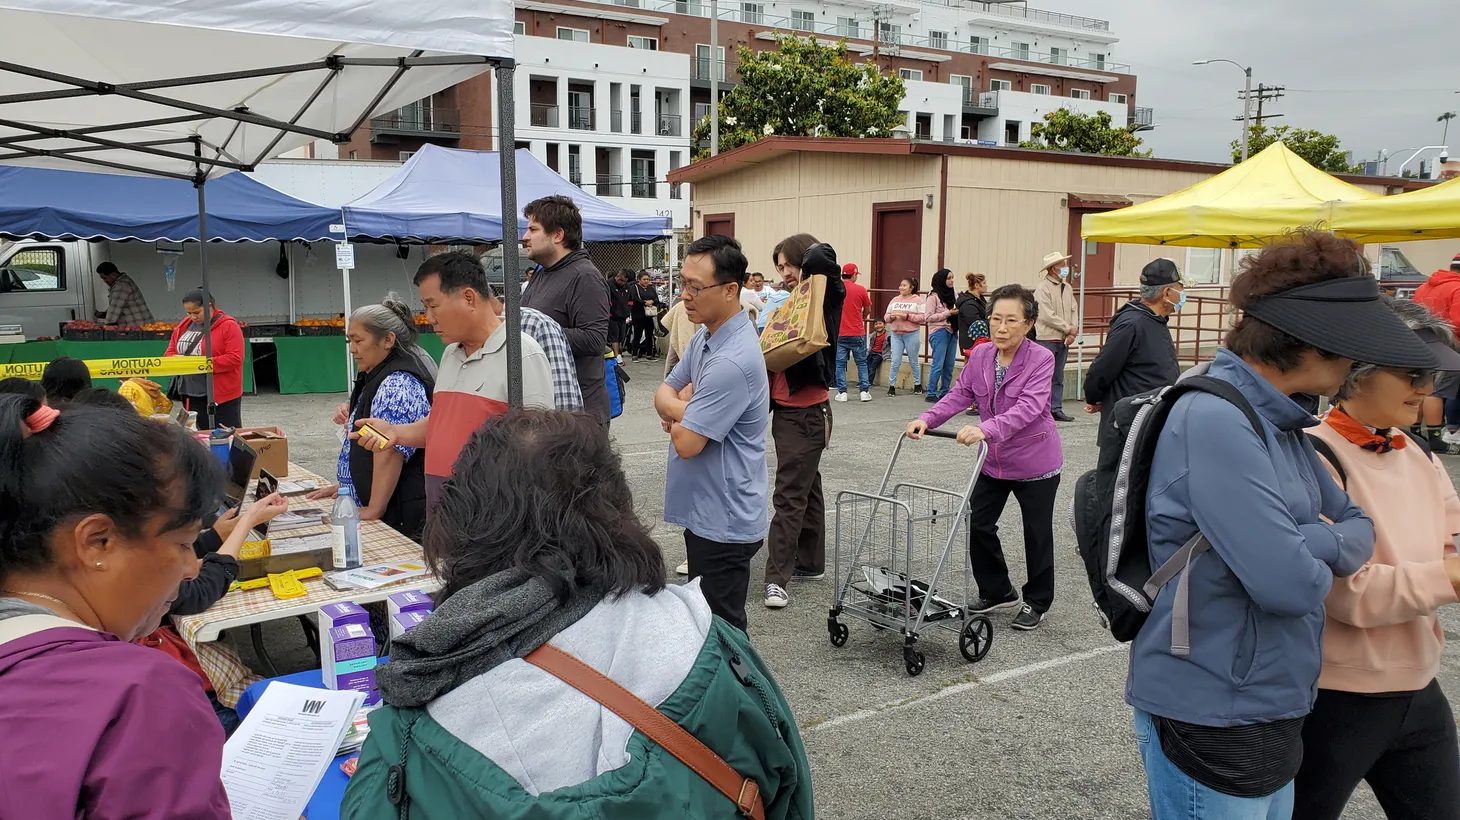 The Market Match program is available at 293 farmers' markets in California including the Adams/Vermont location.